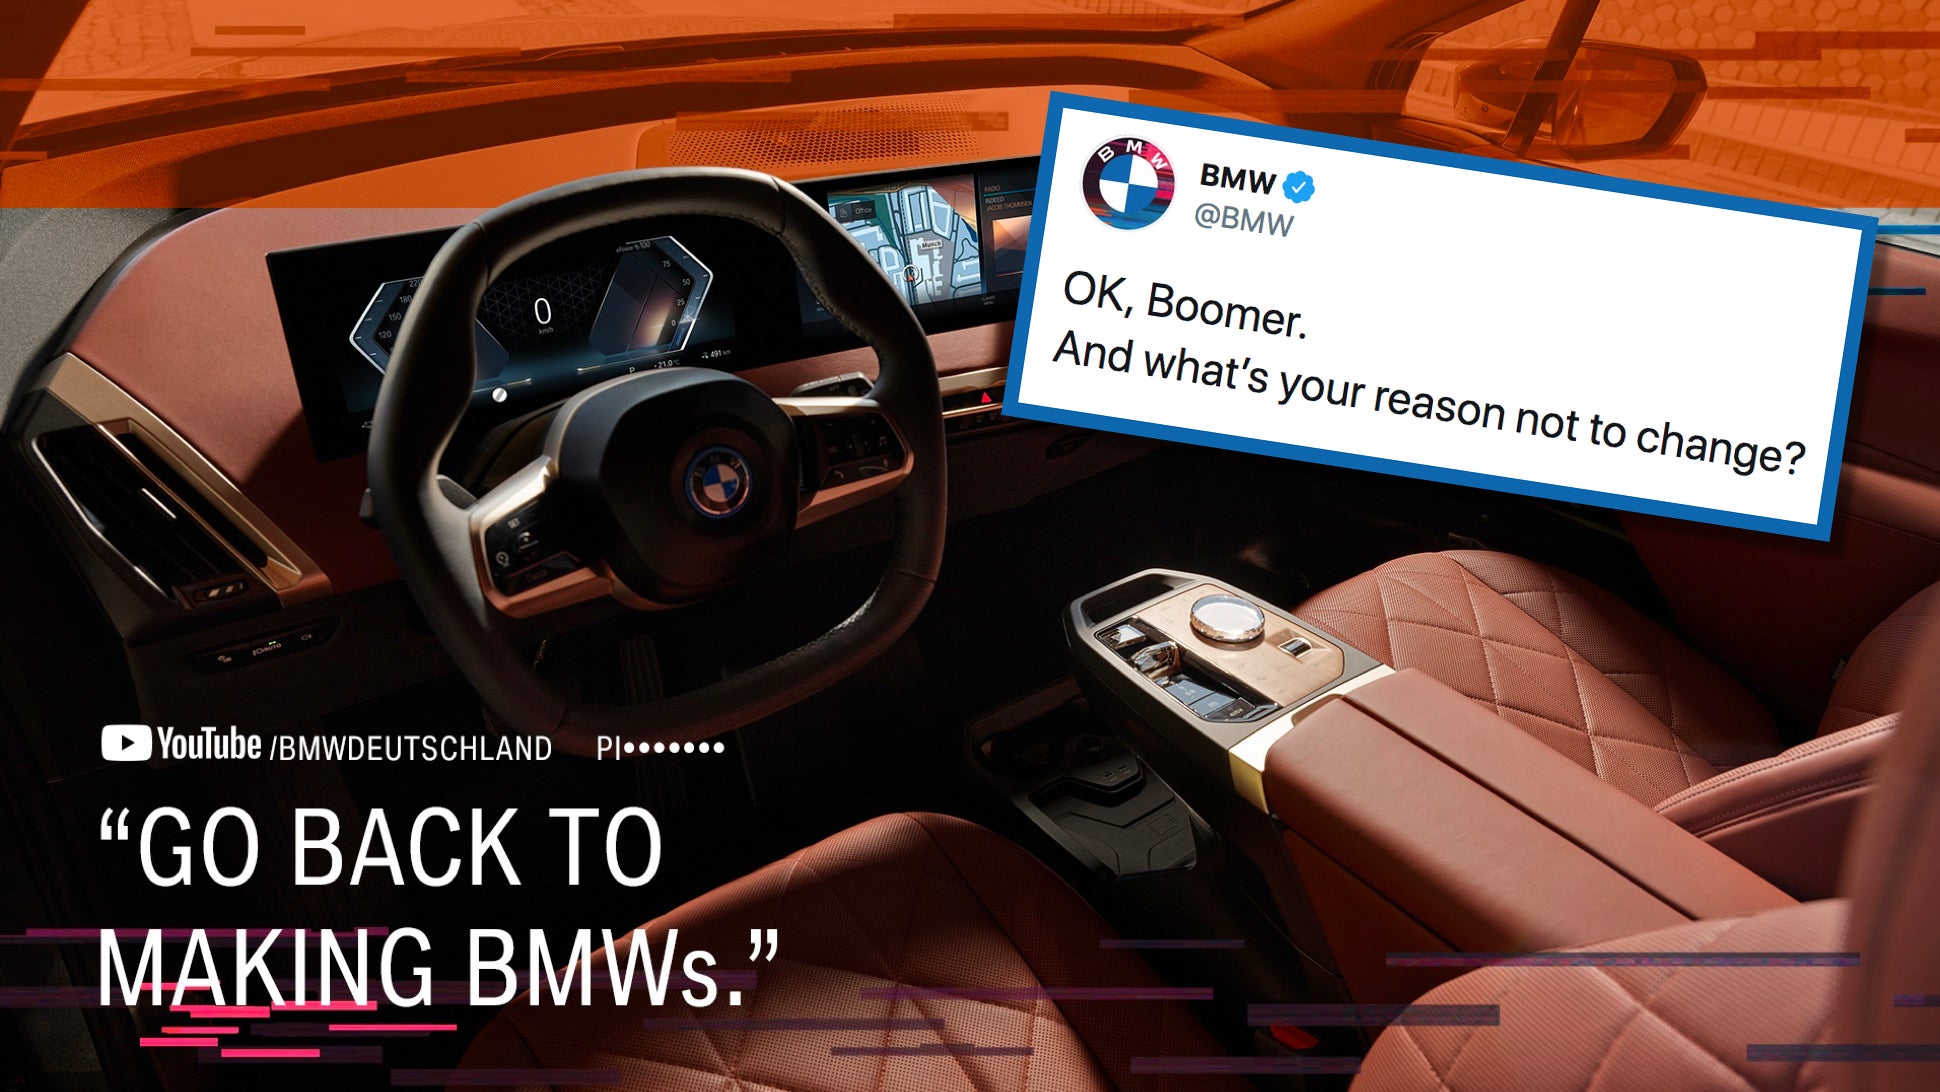 BMW Pushes Weirdly Hostile Marketing Campaign to Say You’re Dumb for Thinking the iX Is Ugly